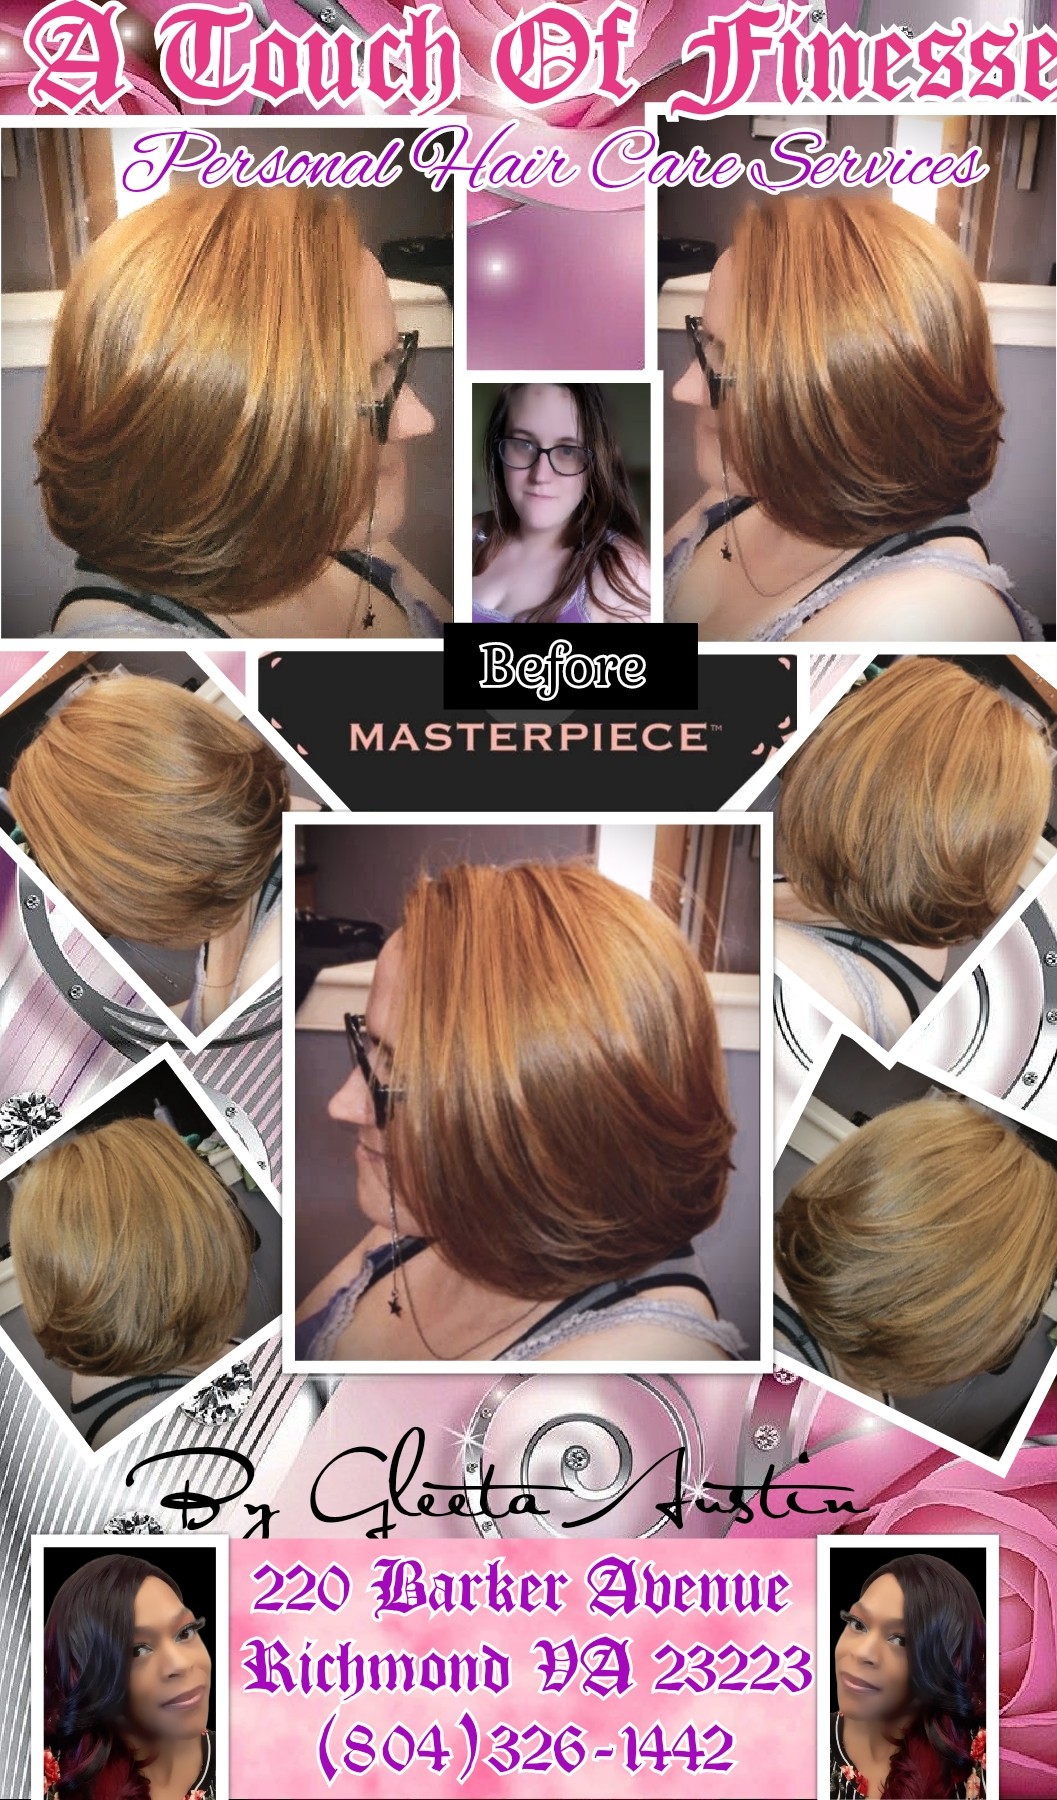 https://ATouchOfFinesseHairCare.as.me/
As a Master Stylist, the gift of being able to Start from the bottom work and train my way to the Top had given My Career a well rounded edge that has permitted My access into further understanding the customers need